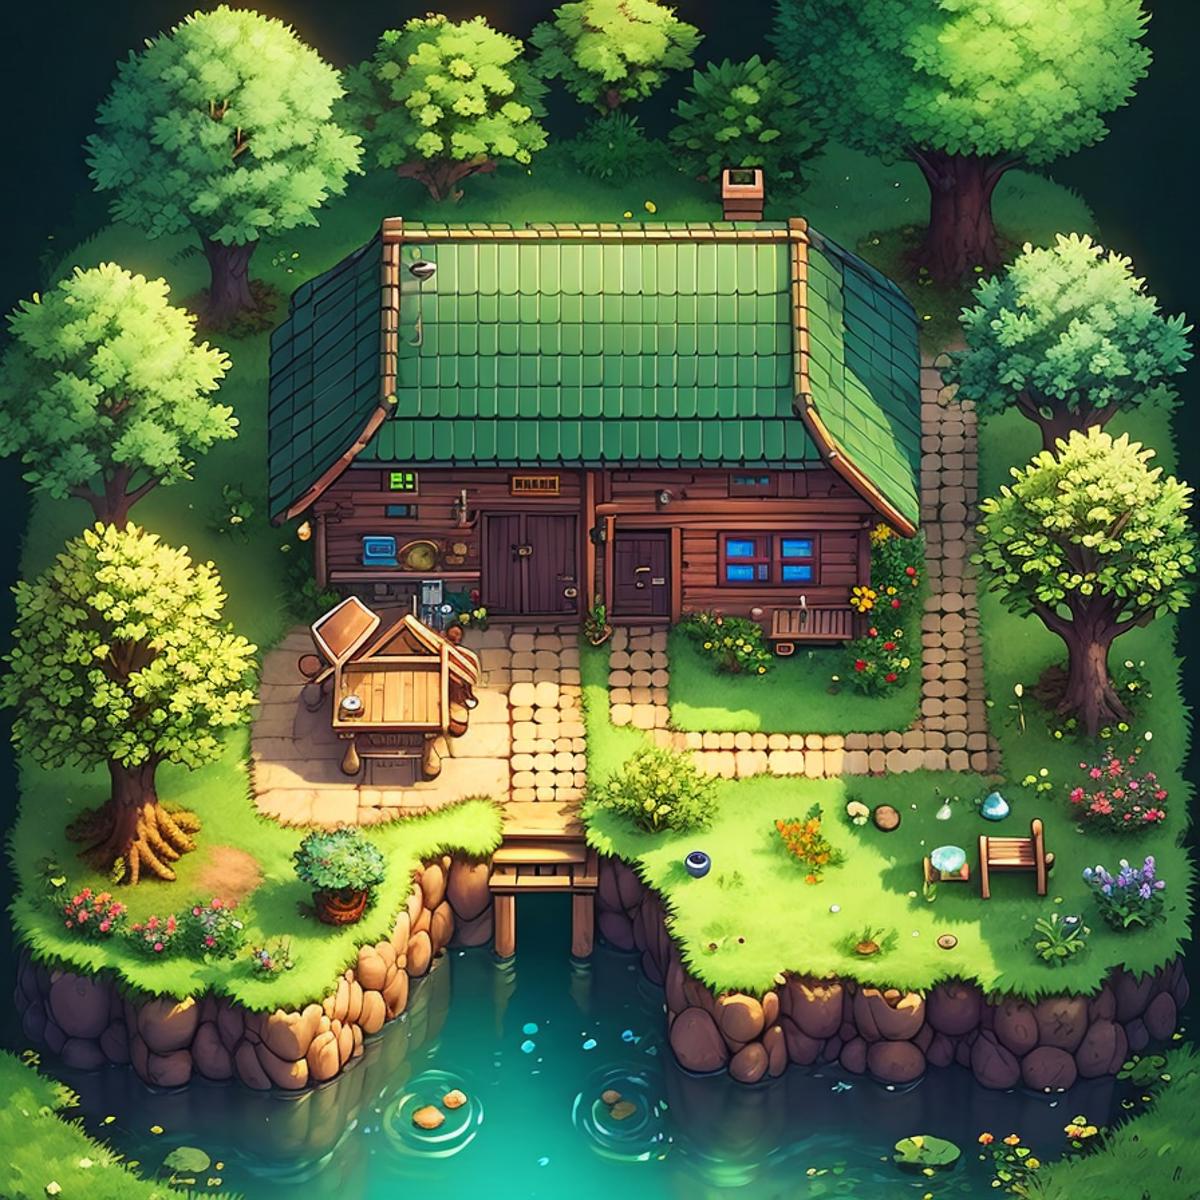 Cartoonish Pond and House with Dock, Bench, and Trees